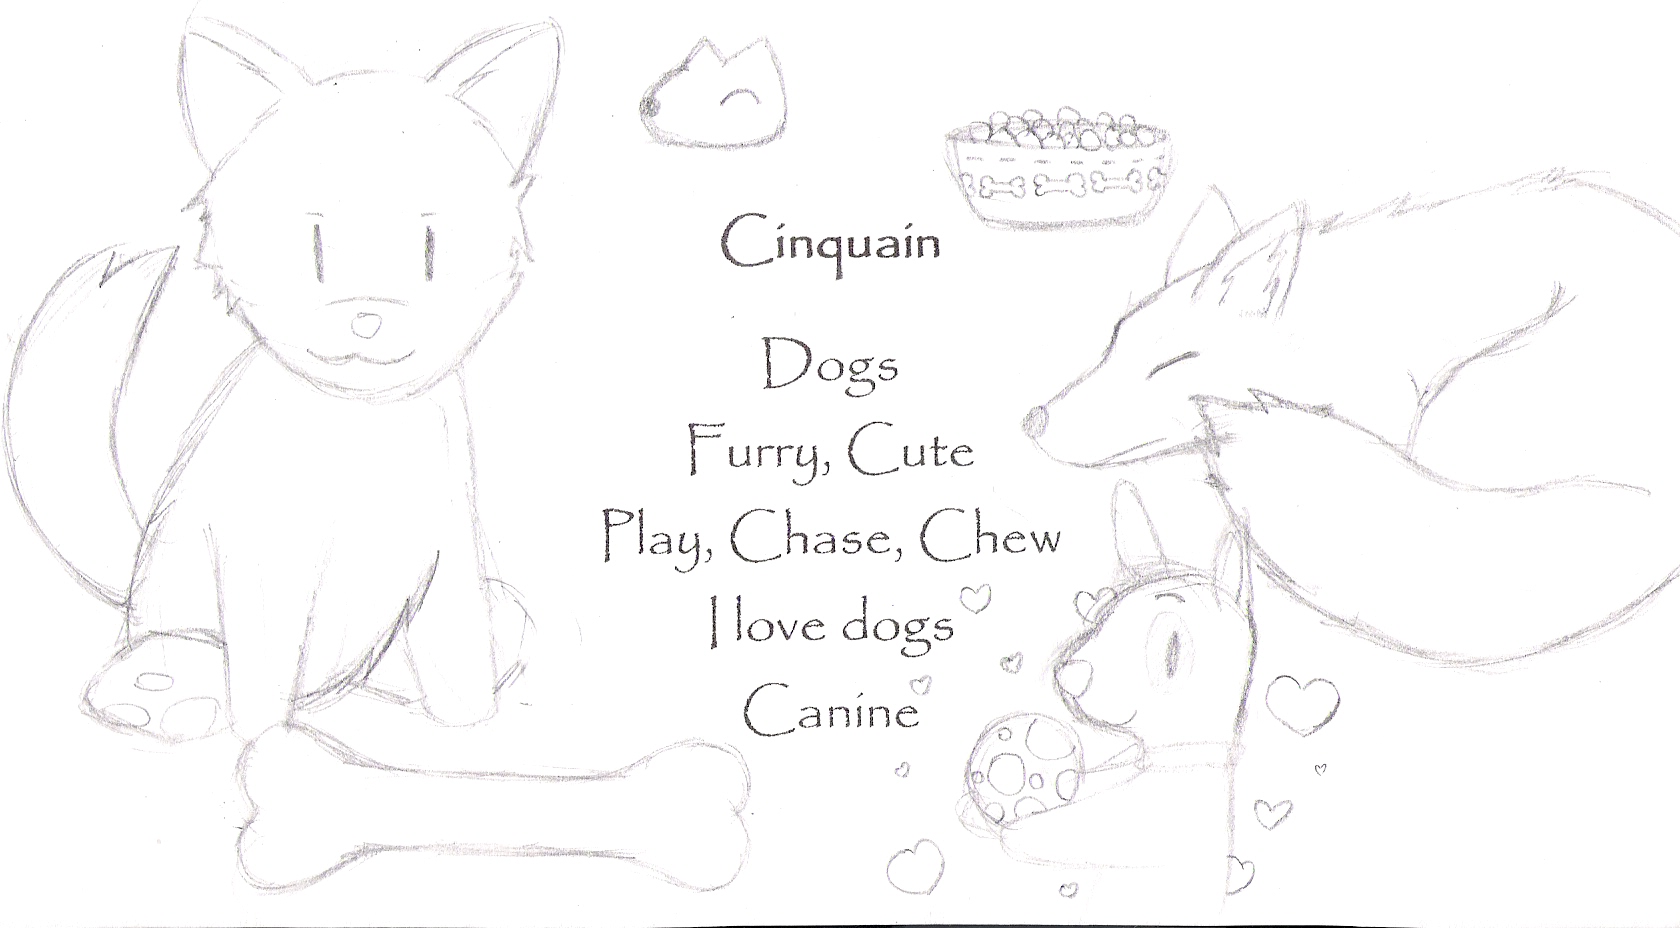 Doggy Cinquain by Darksideofme